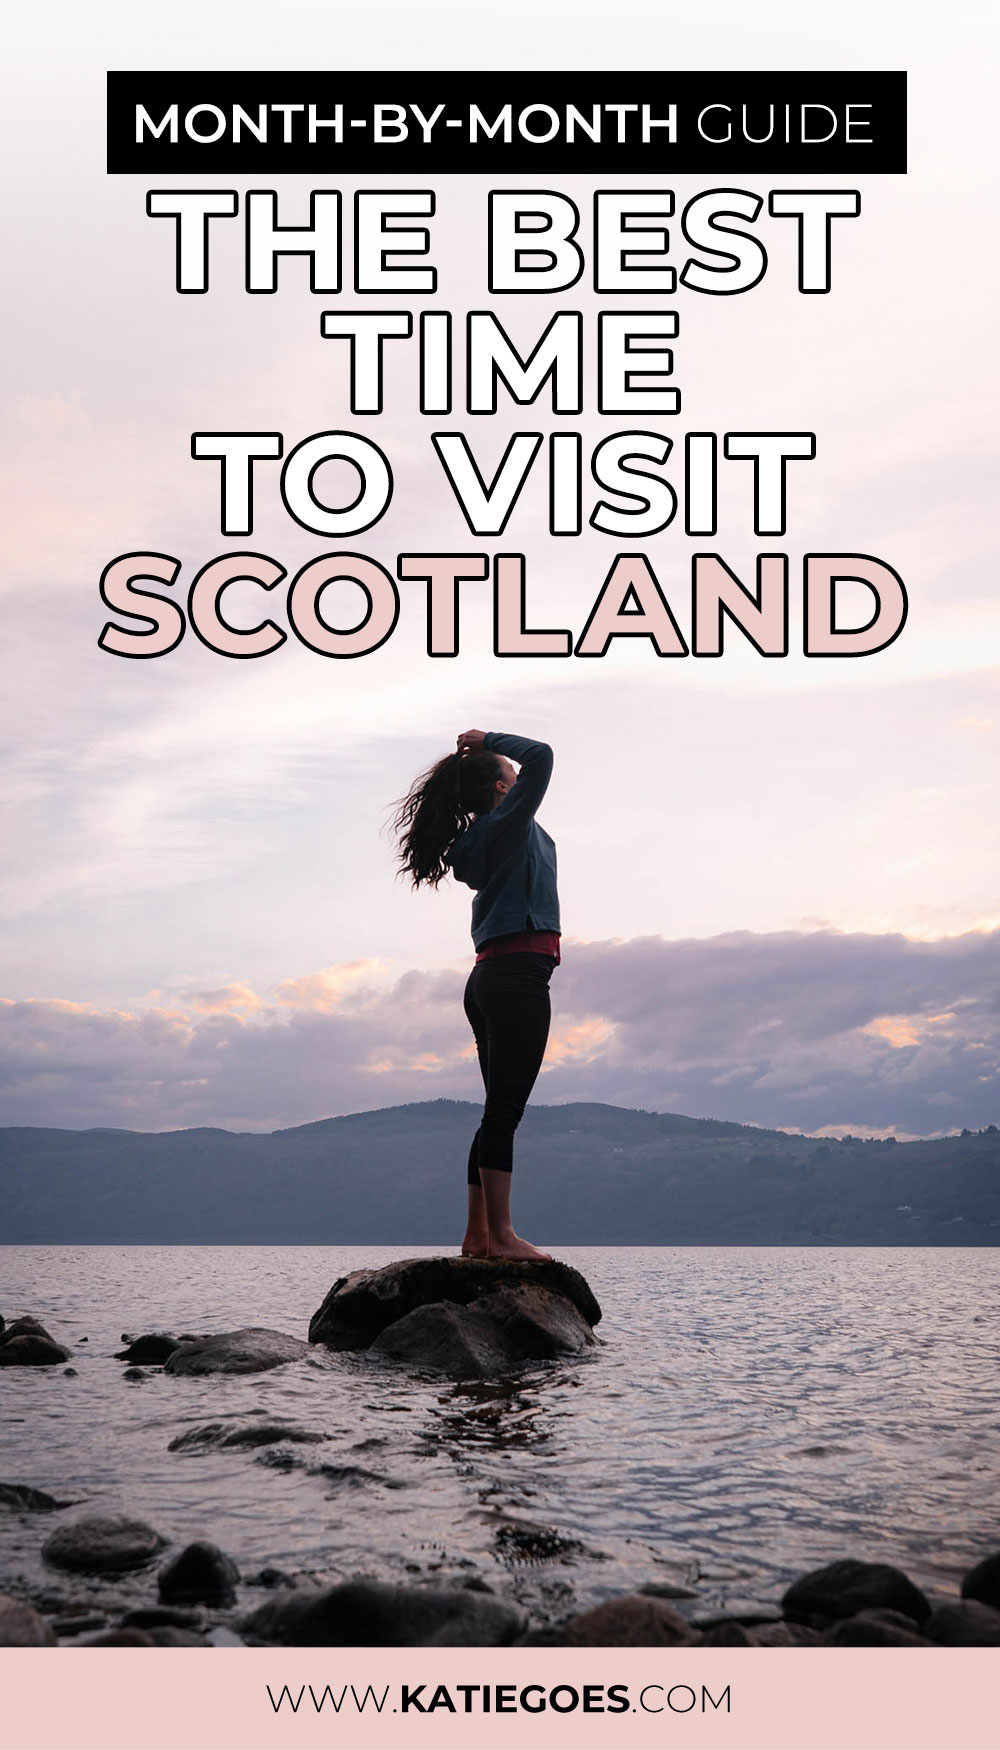 Pin Cover: What is the Best Month to Visit Scotland? Month-By-Month Guide to the Best Time to Visit Scotland